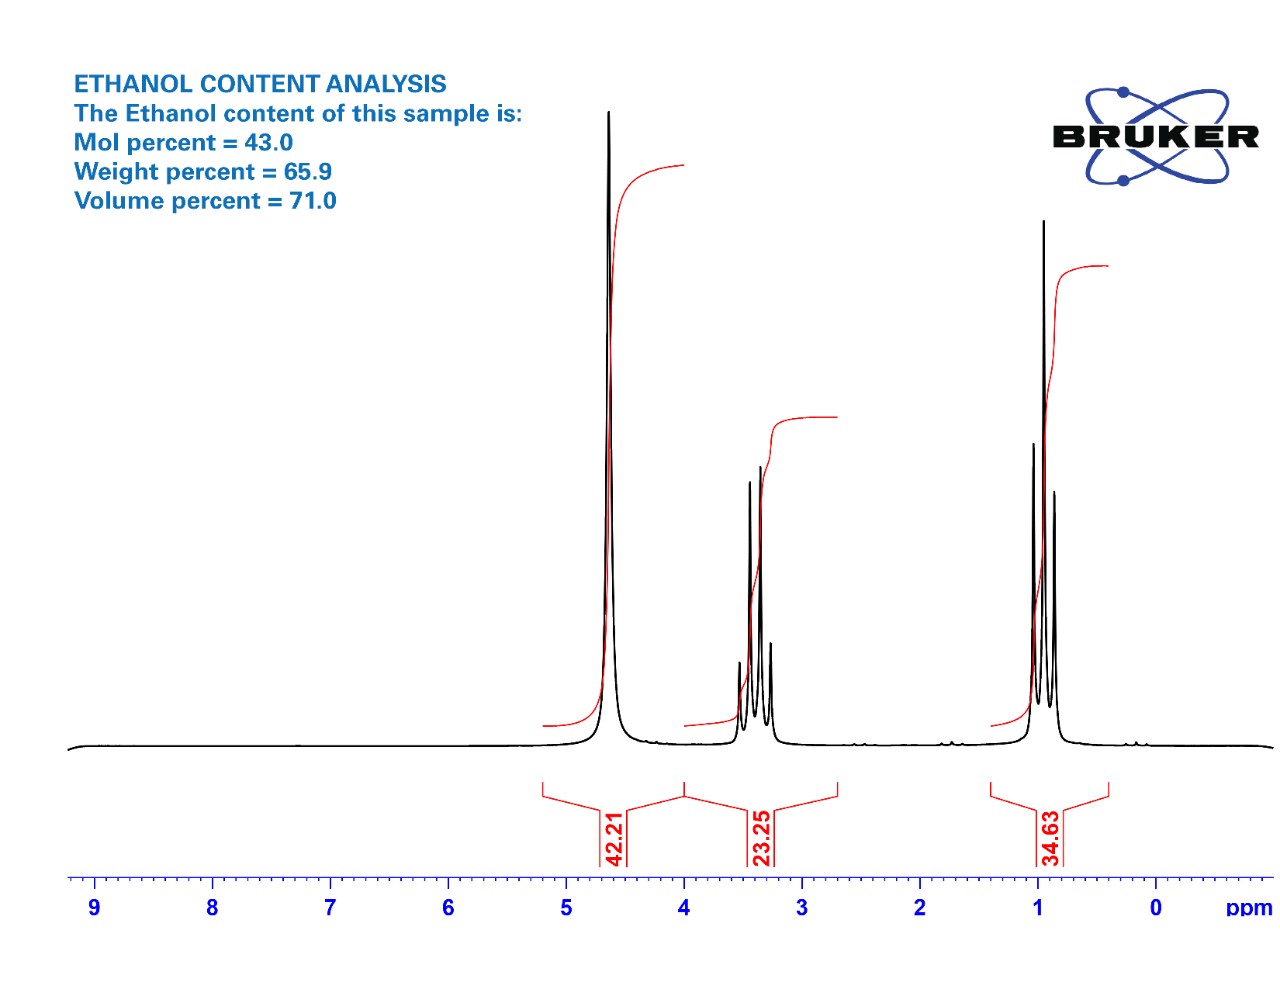 Figure 1: NMR sample report showing ethanol content of a hand sanitizer.